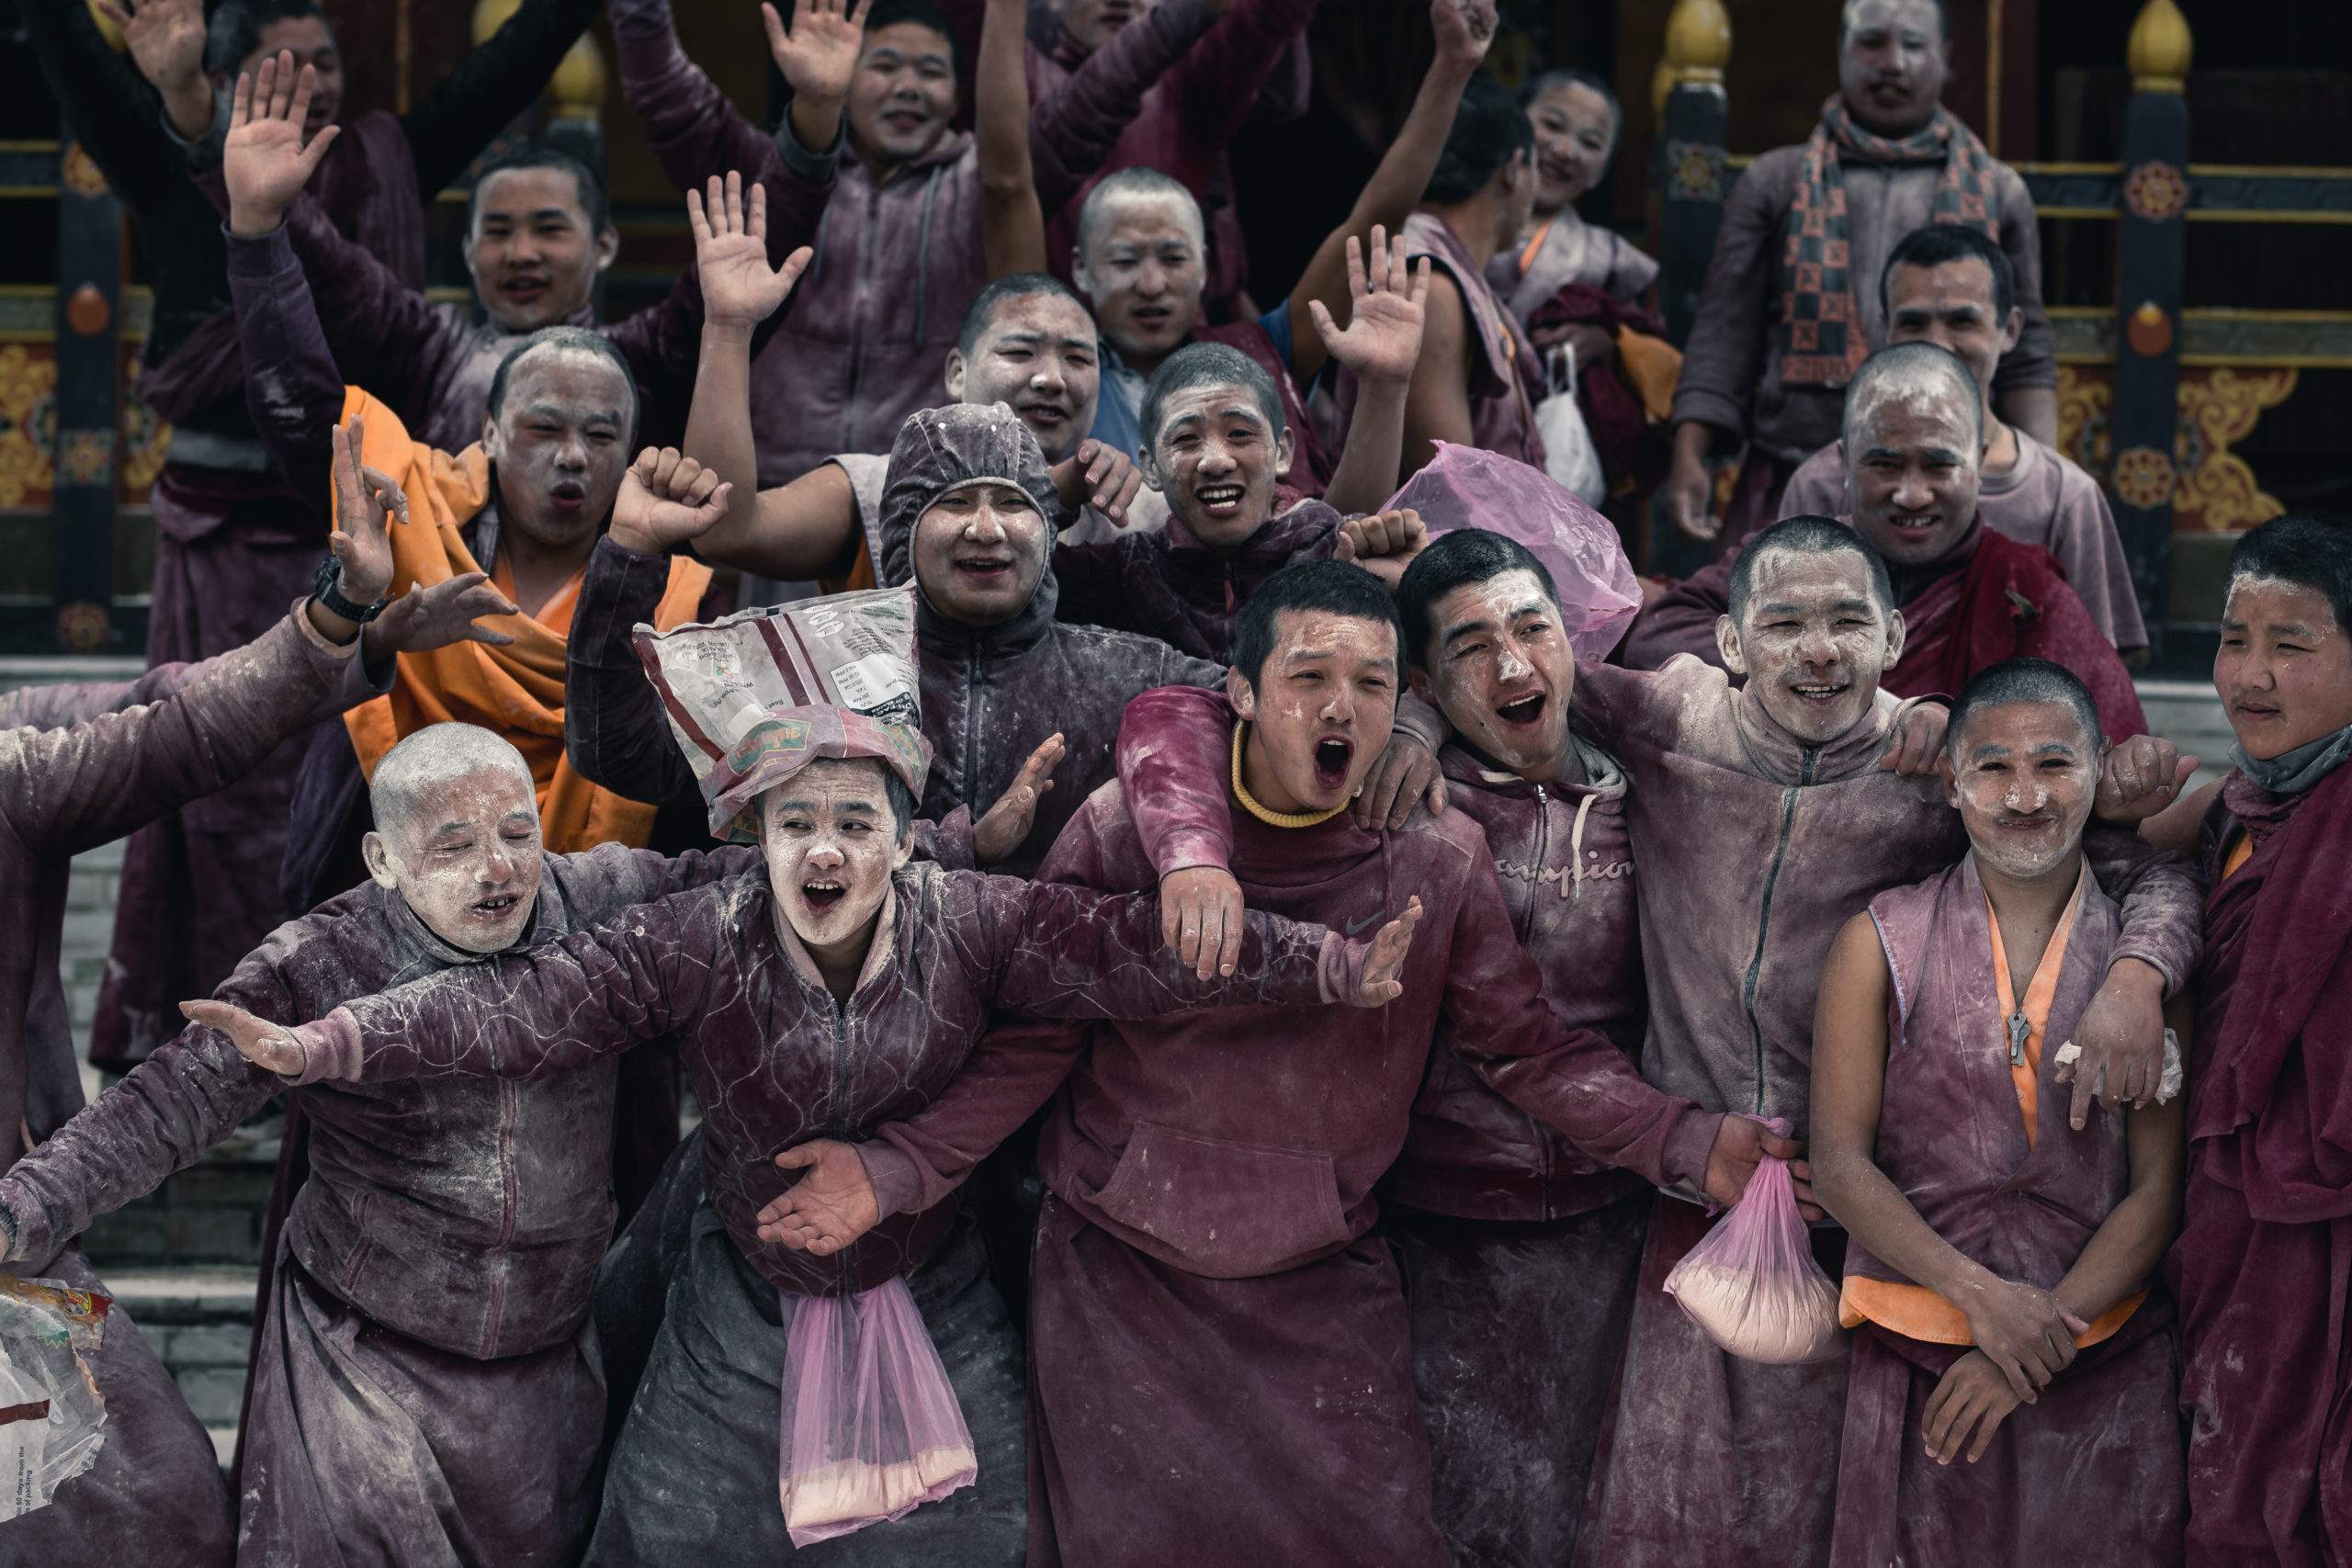 A group of Bhutanese monks participating in the Losar New Year Festival at a Monastery in Central Bhutan